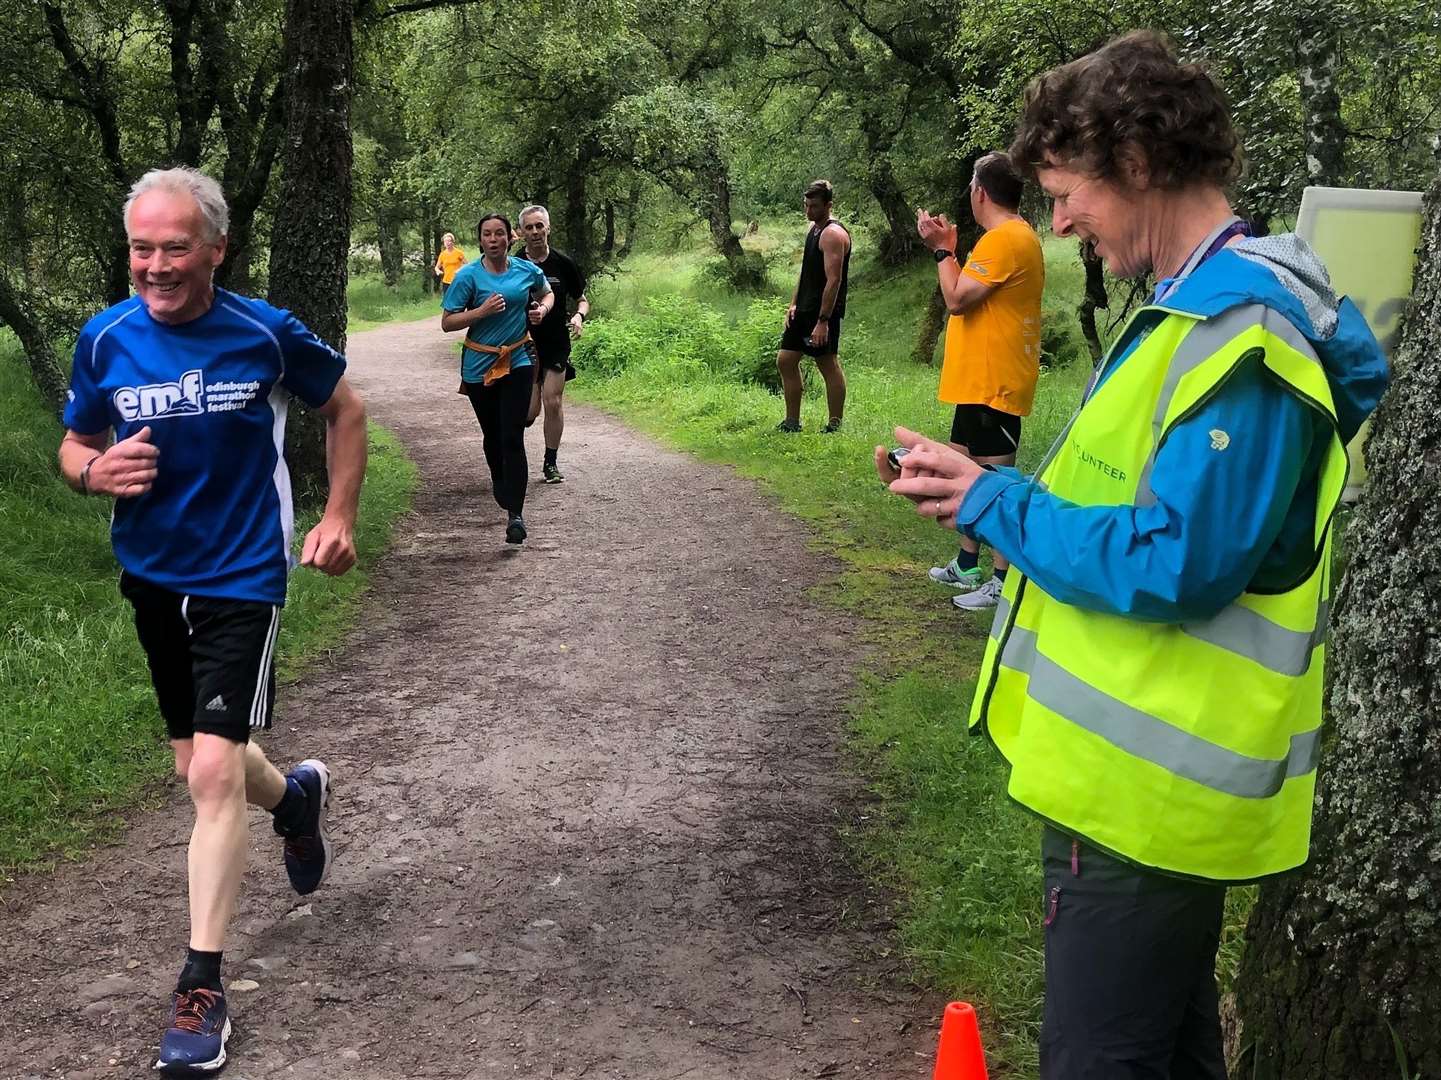 Parkrun regularly attracts around 100 runners in any conditions